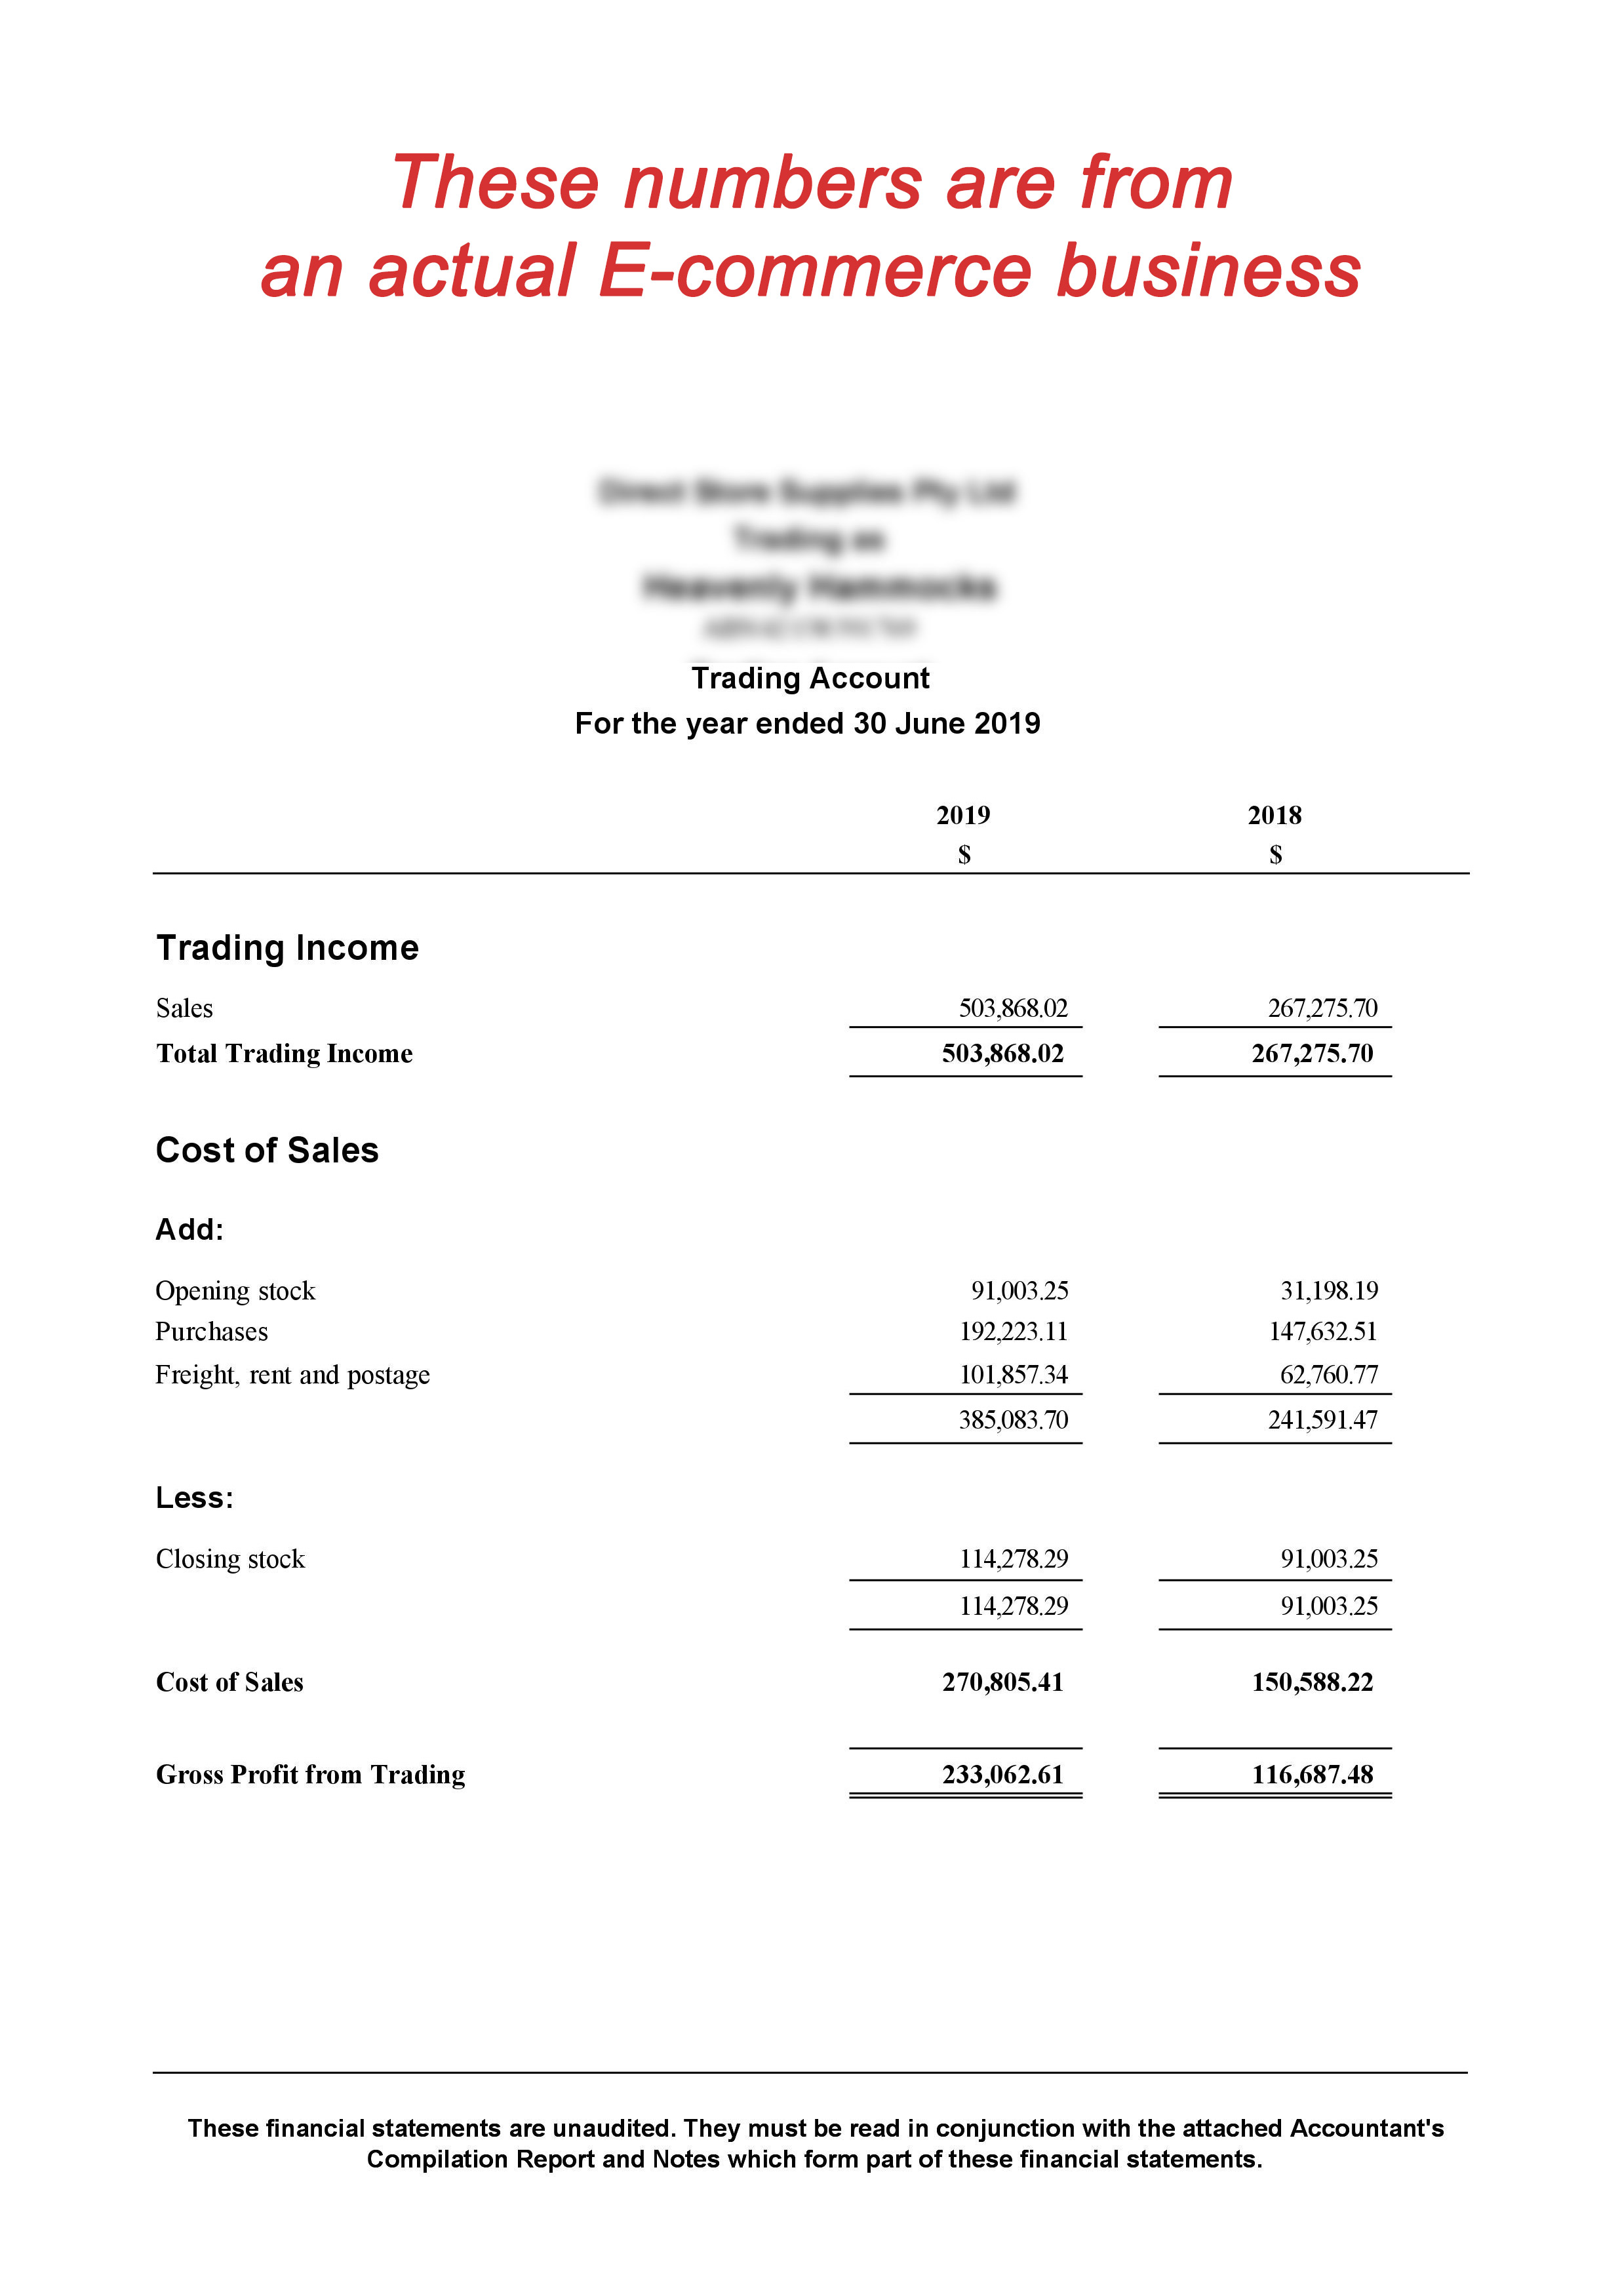 Trading Account Statement Including Gross Profit Year On Year